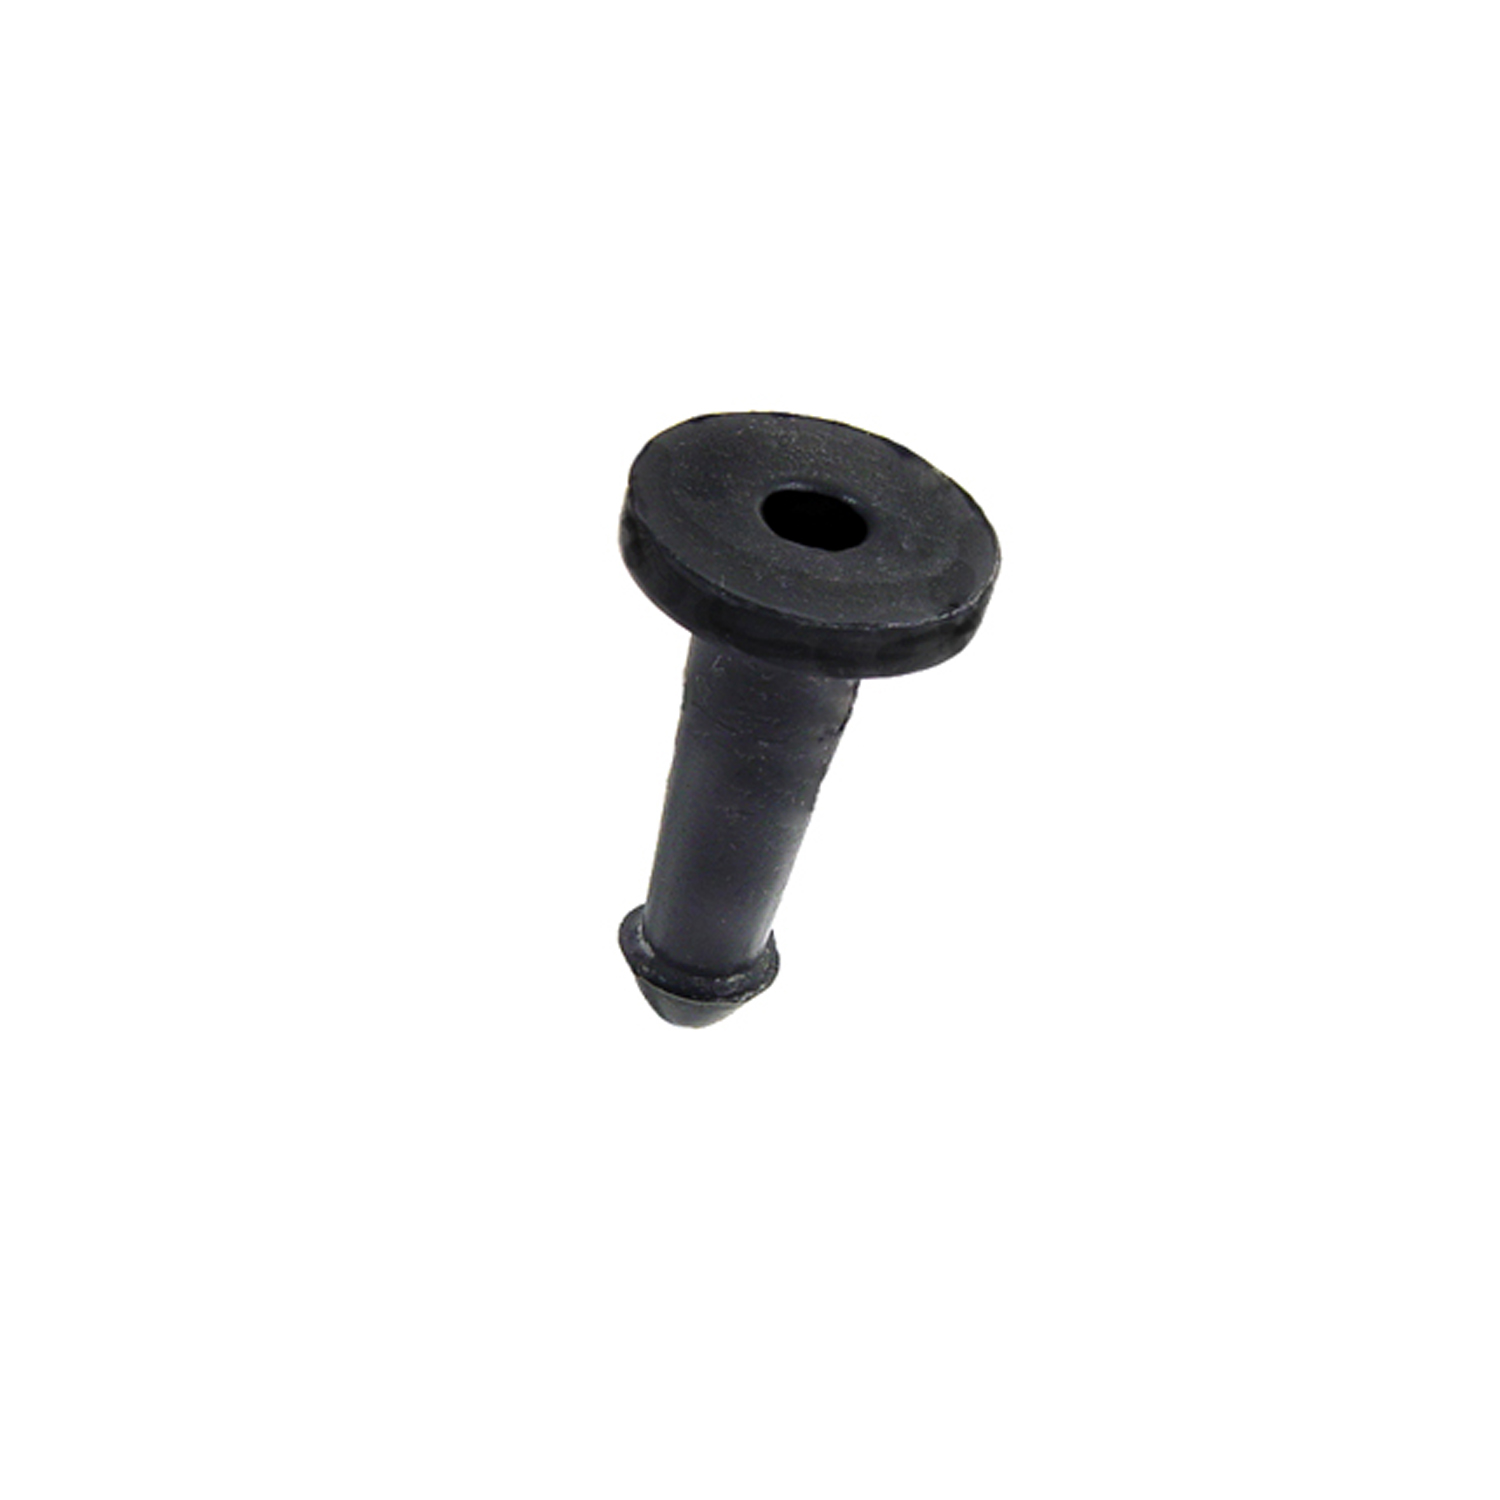 1974 Plymouth Barracuda Firewall to Dash Insulation Fastener.  Made of black rubber-SM 80-B